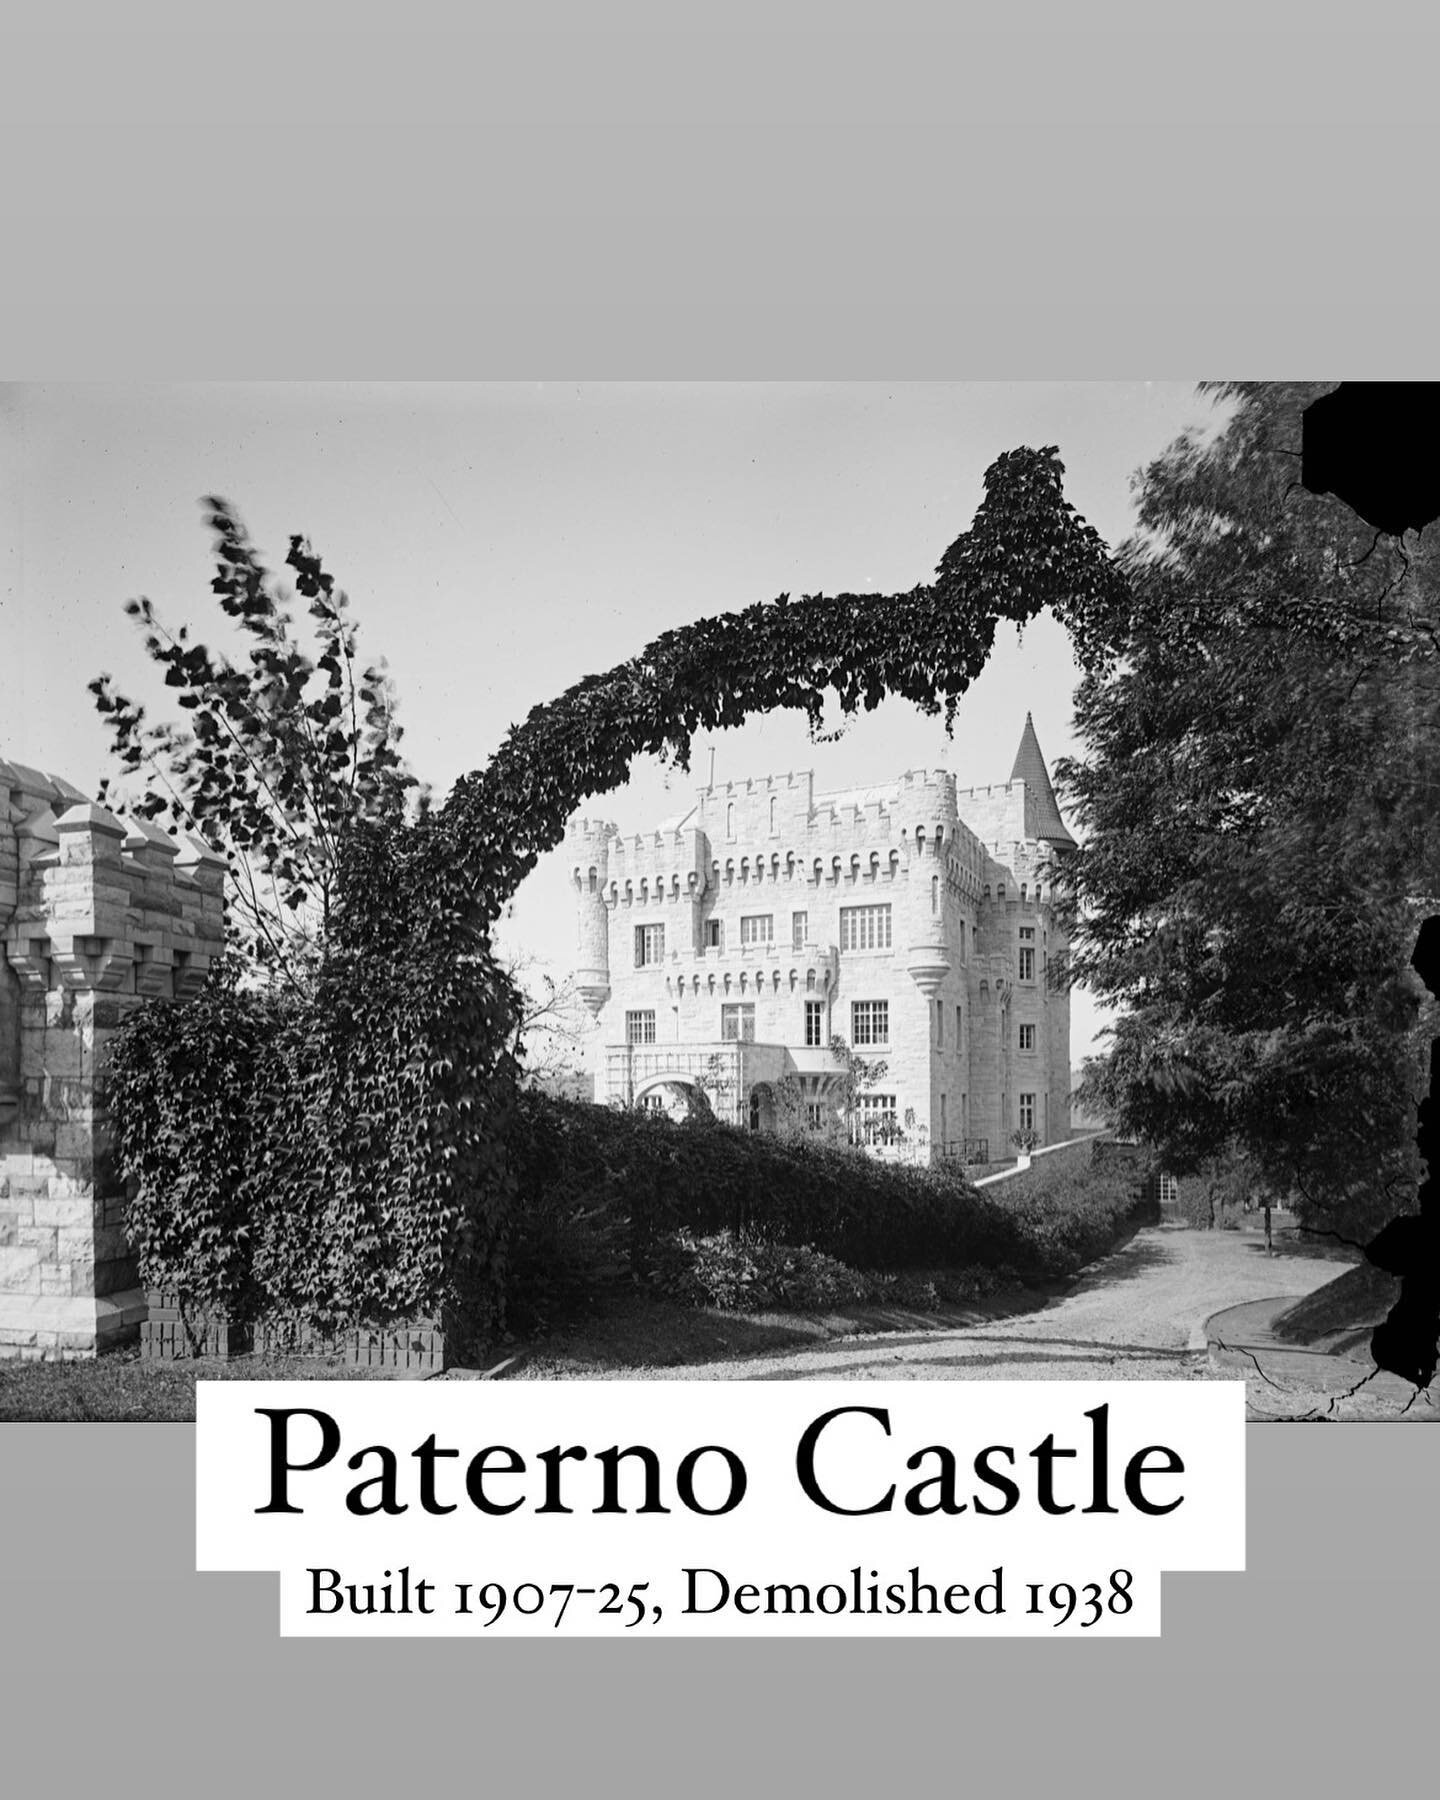 On August 7, 1938, The New York Times announced the imminent destruction of one of the city&rsquo;s most unique homes: &ldquo;One of the well-known landmarks in upper Manhattan, the Paterno Castle overlooking the Hudson River at an elevation of more 